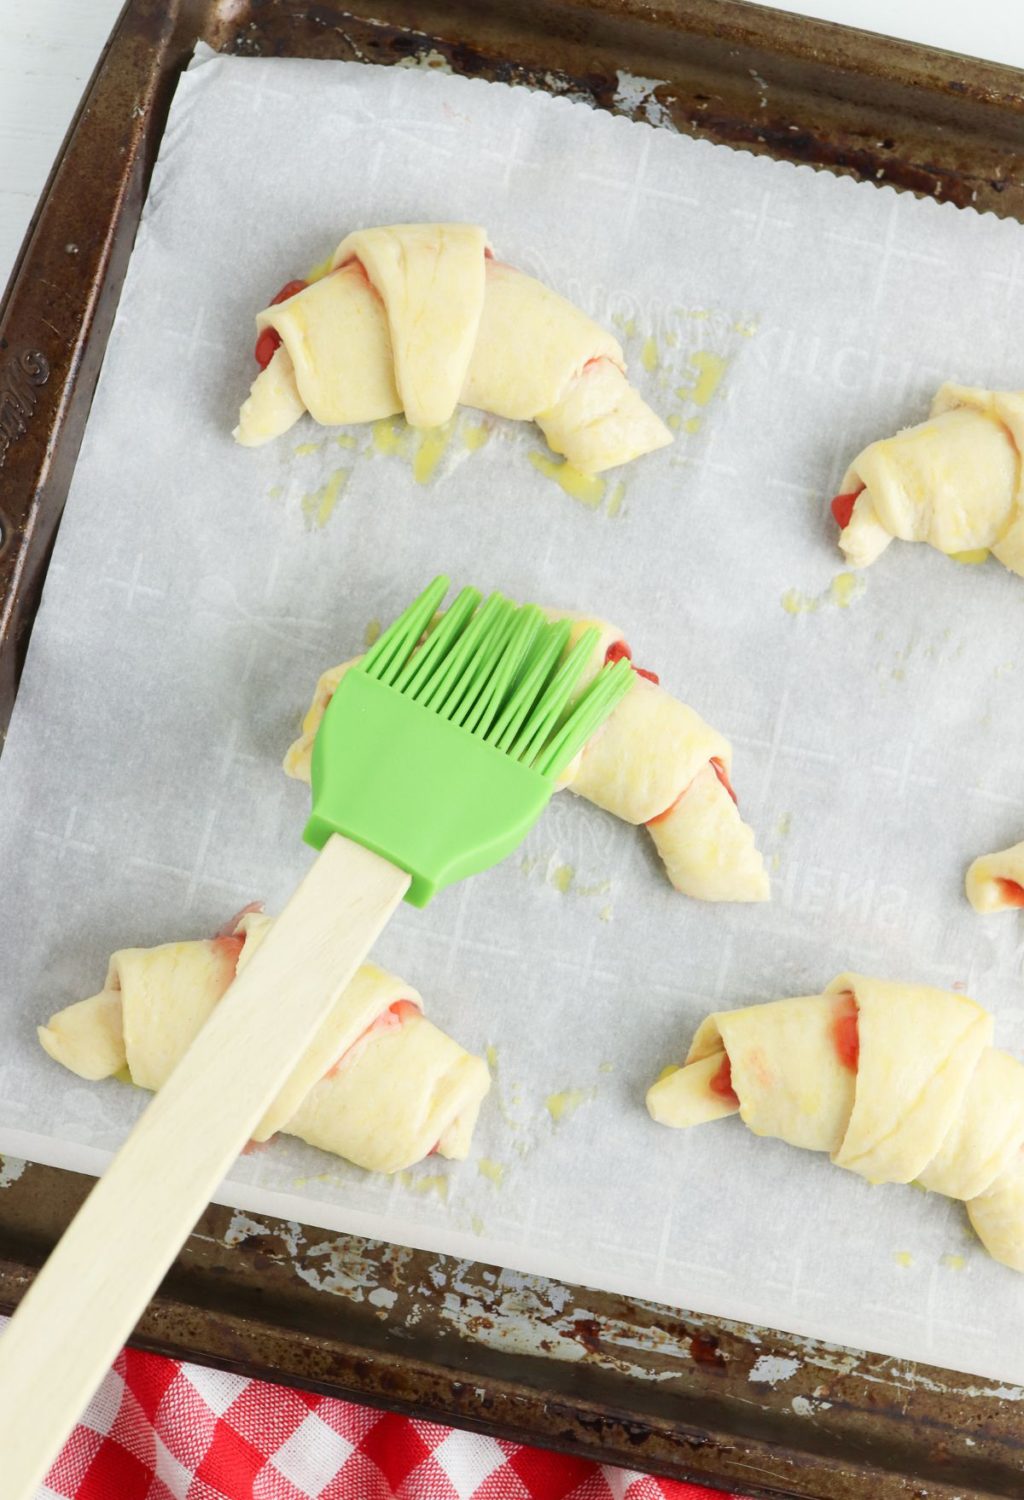 A green spatula is used to brush dough onto a baking sheet.